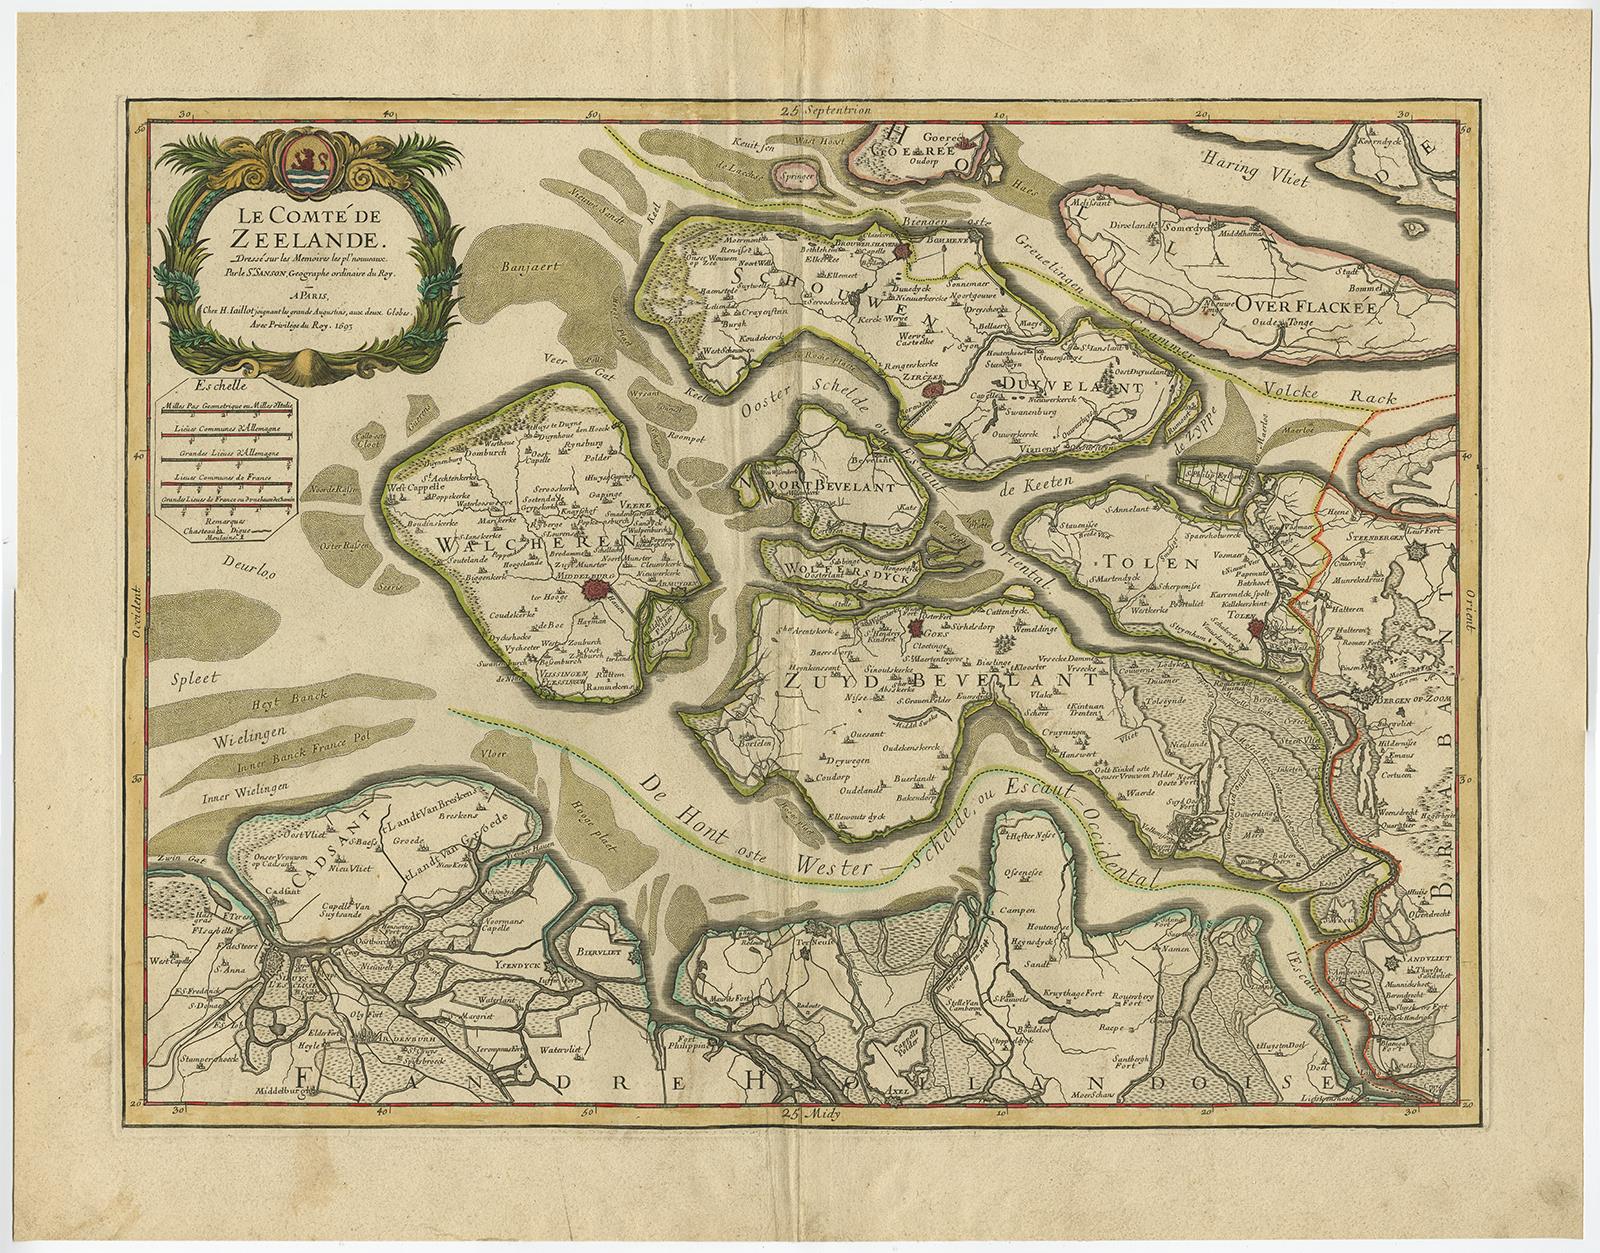 Antique map titled 'Le Comte de Zeelande (..).' Detailed map of the province of Zeeland, The Netherlands. Details shown include fortified towns, roads, sandbanks and marshlands. Based upon the earlier work of Sanson. Source unknown, to be